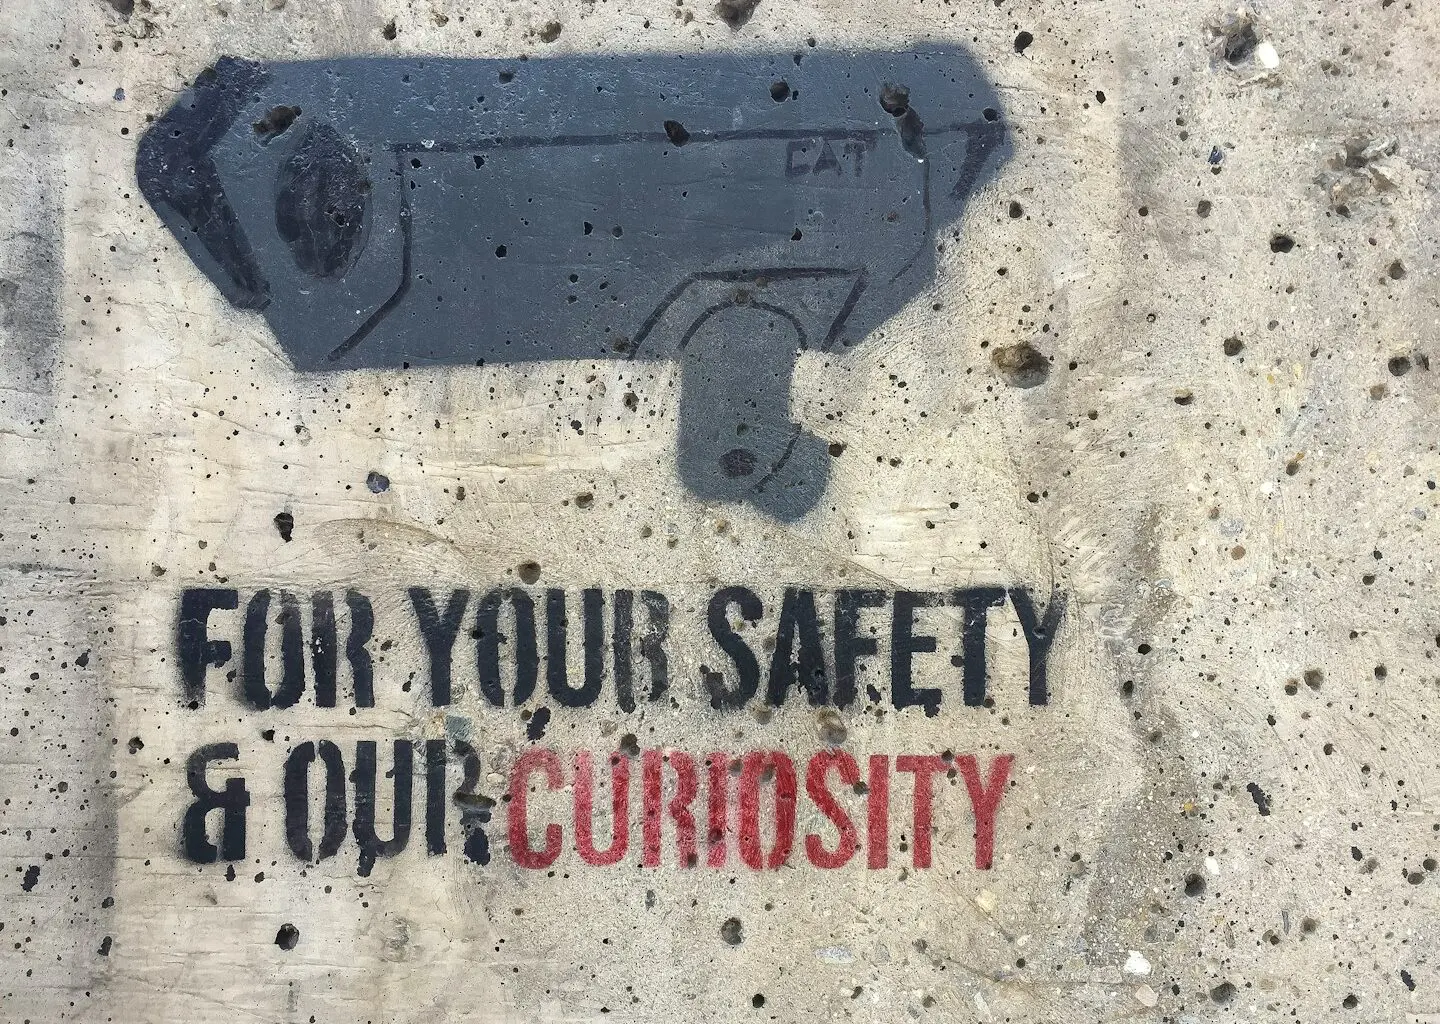 Graffiti on a sidewalk that includes a stenciled image of a surveillance camera and the phrase "FOR YOUR SAFETY & OUR CURIOSITY" in capital letters.